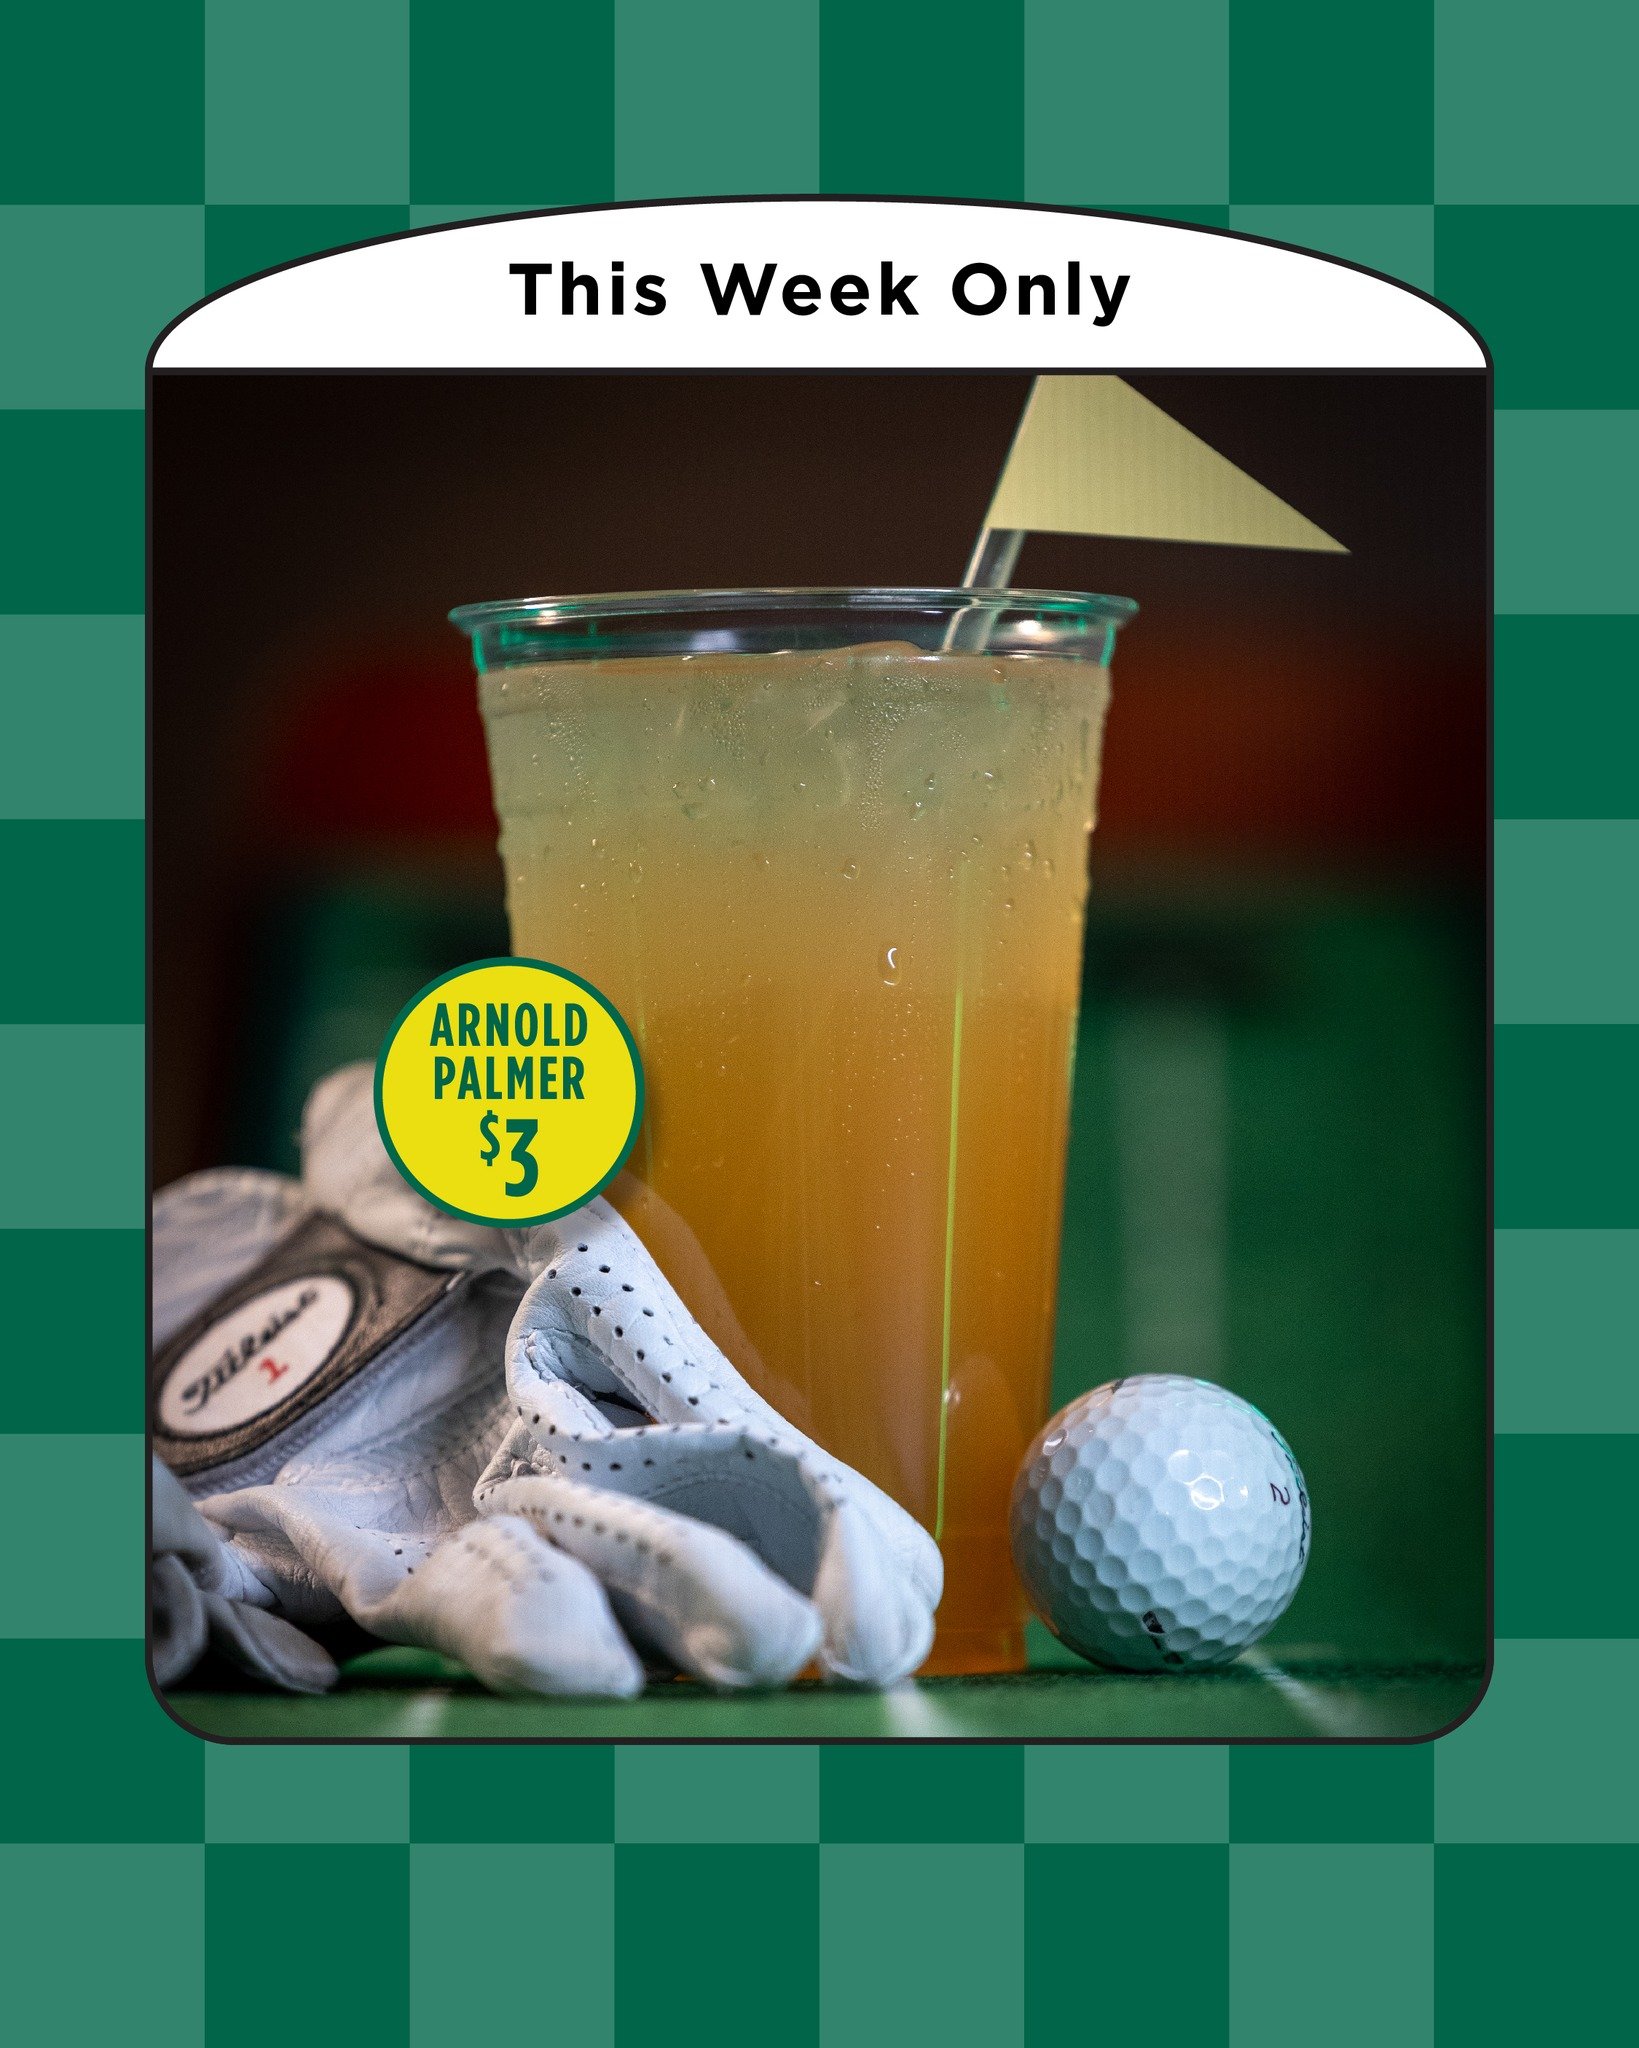 take your shot and try one of our Master's-themed menu items. available for purchase this week ONLY!